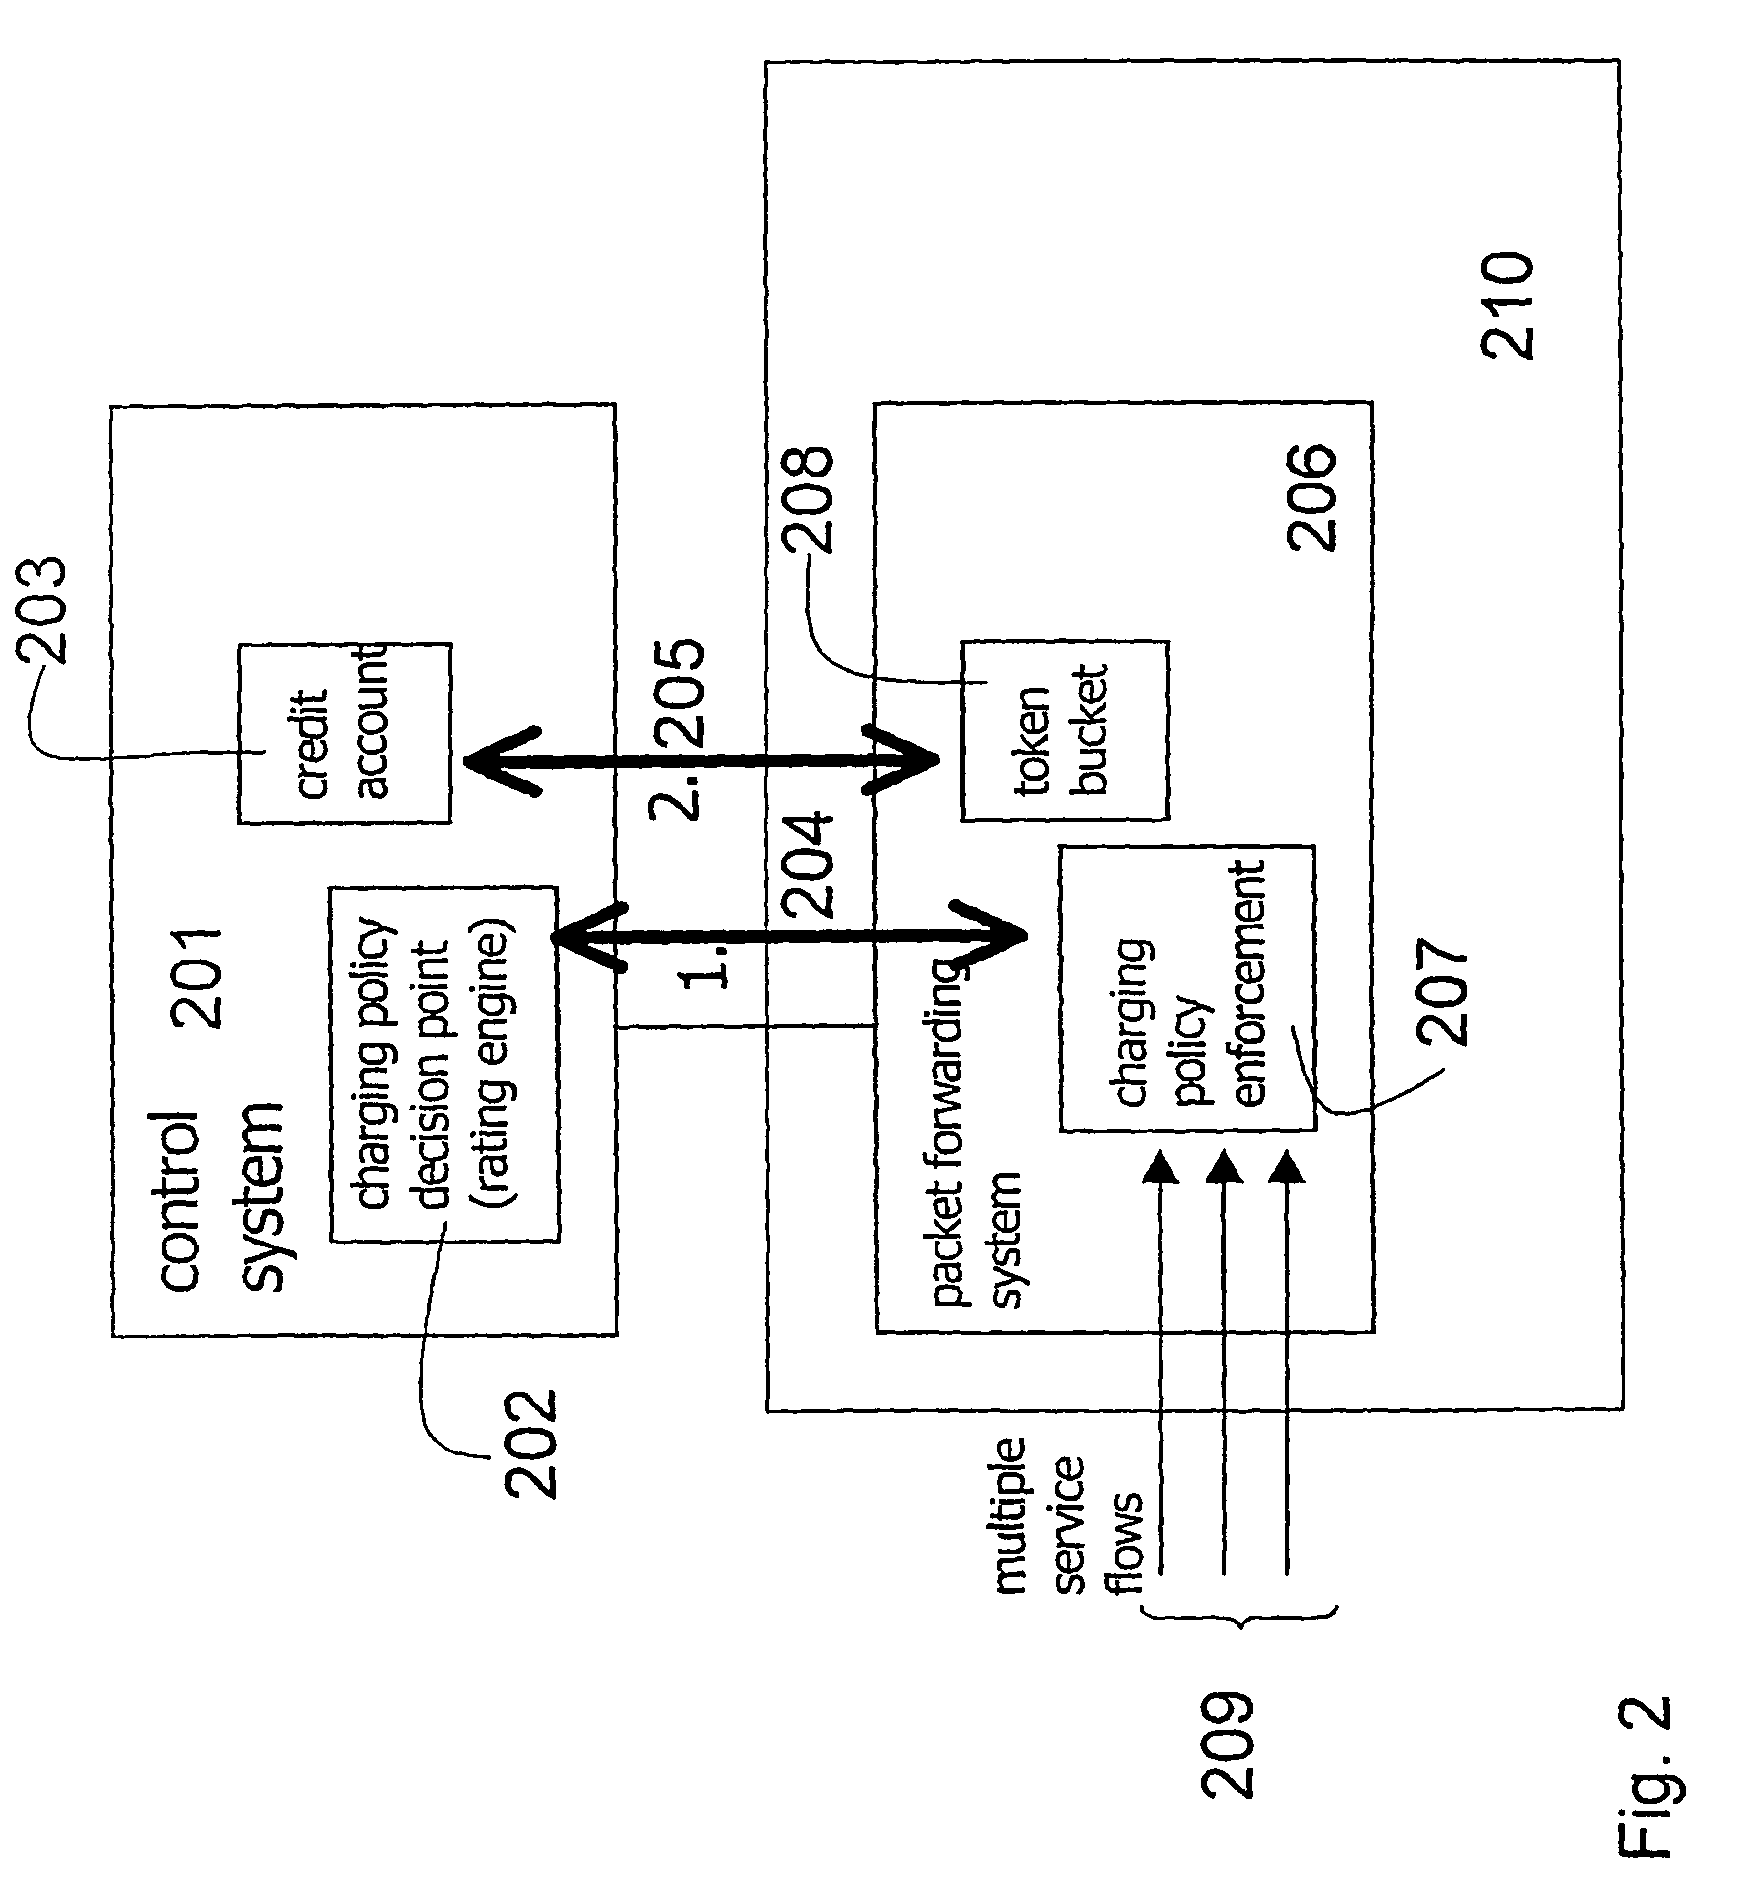 System for providing flexible charging in a network